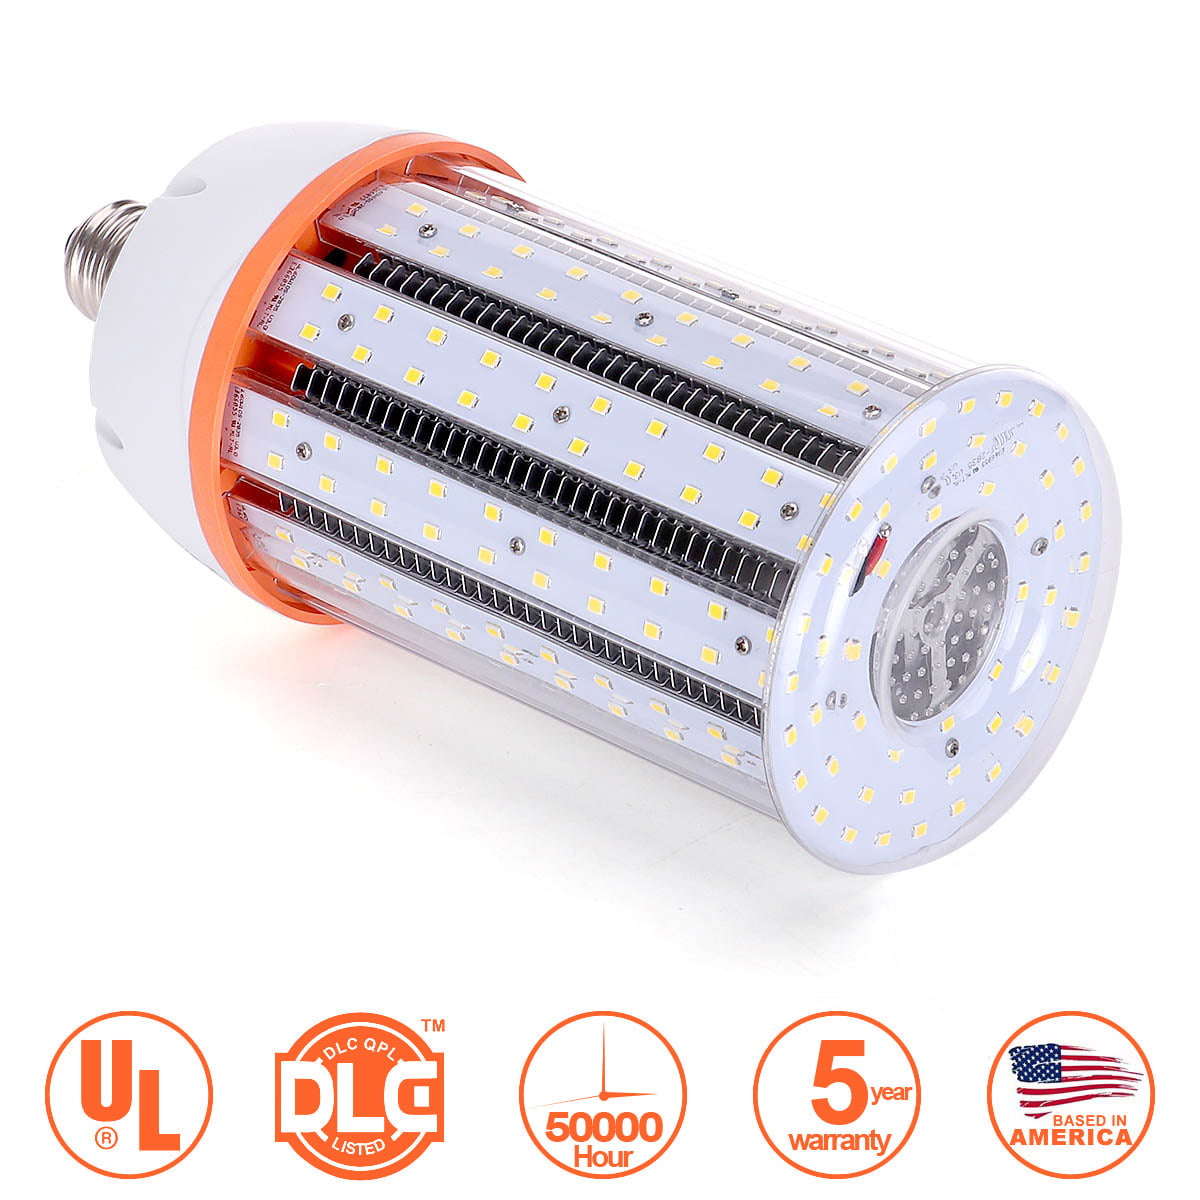 100W E39 LED Corn Bulb Lamp Light Cool White Super Bright with Free Adapter 